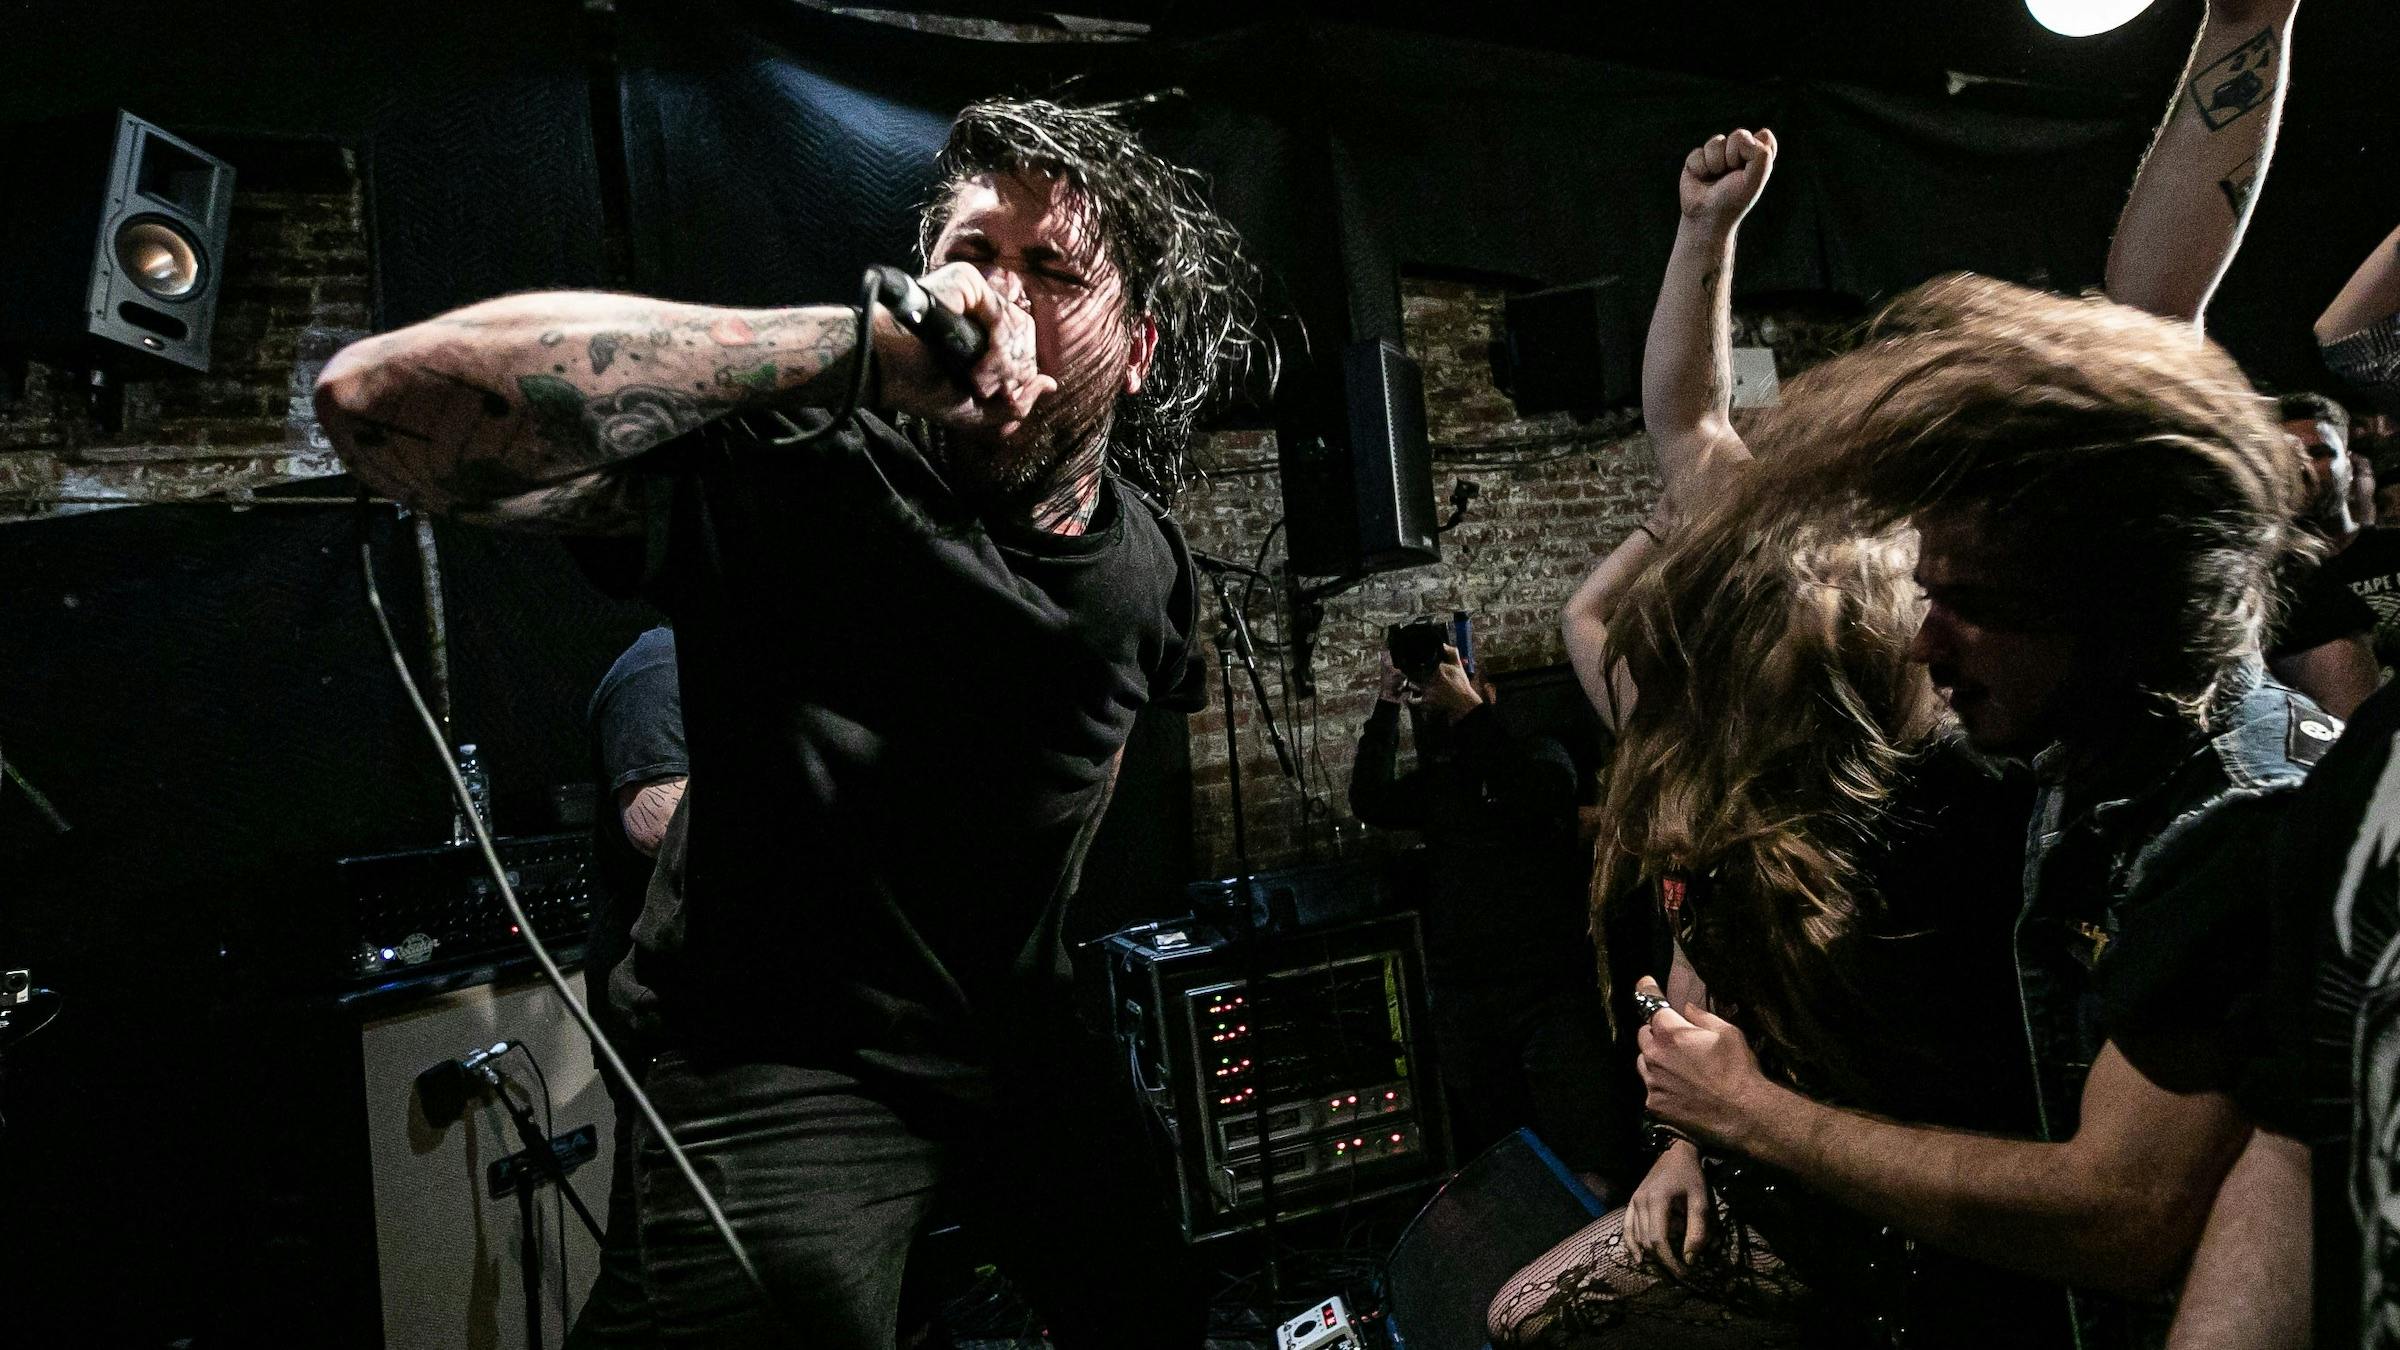 Tomorrow: Watch Fit For An Autopsy Go Full Apocalyptic On A Small Brooklyn Dive Bar